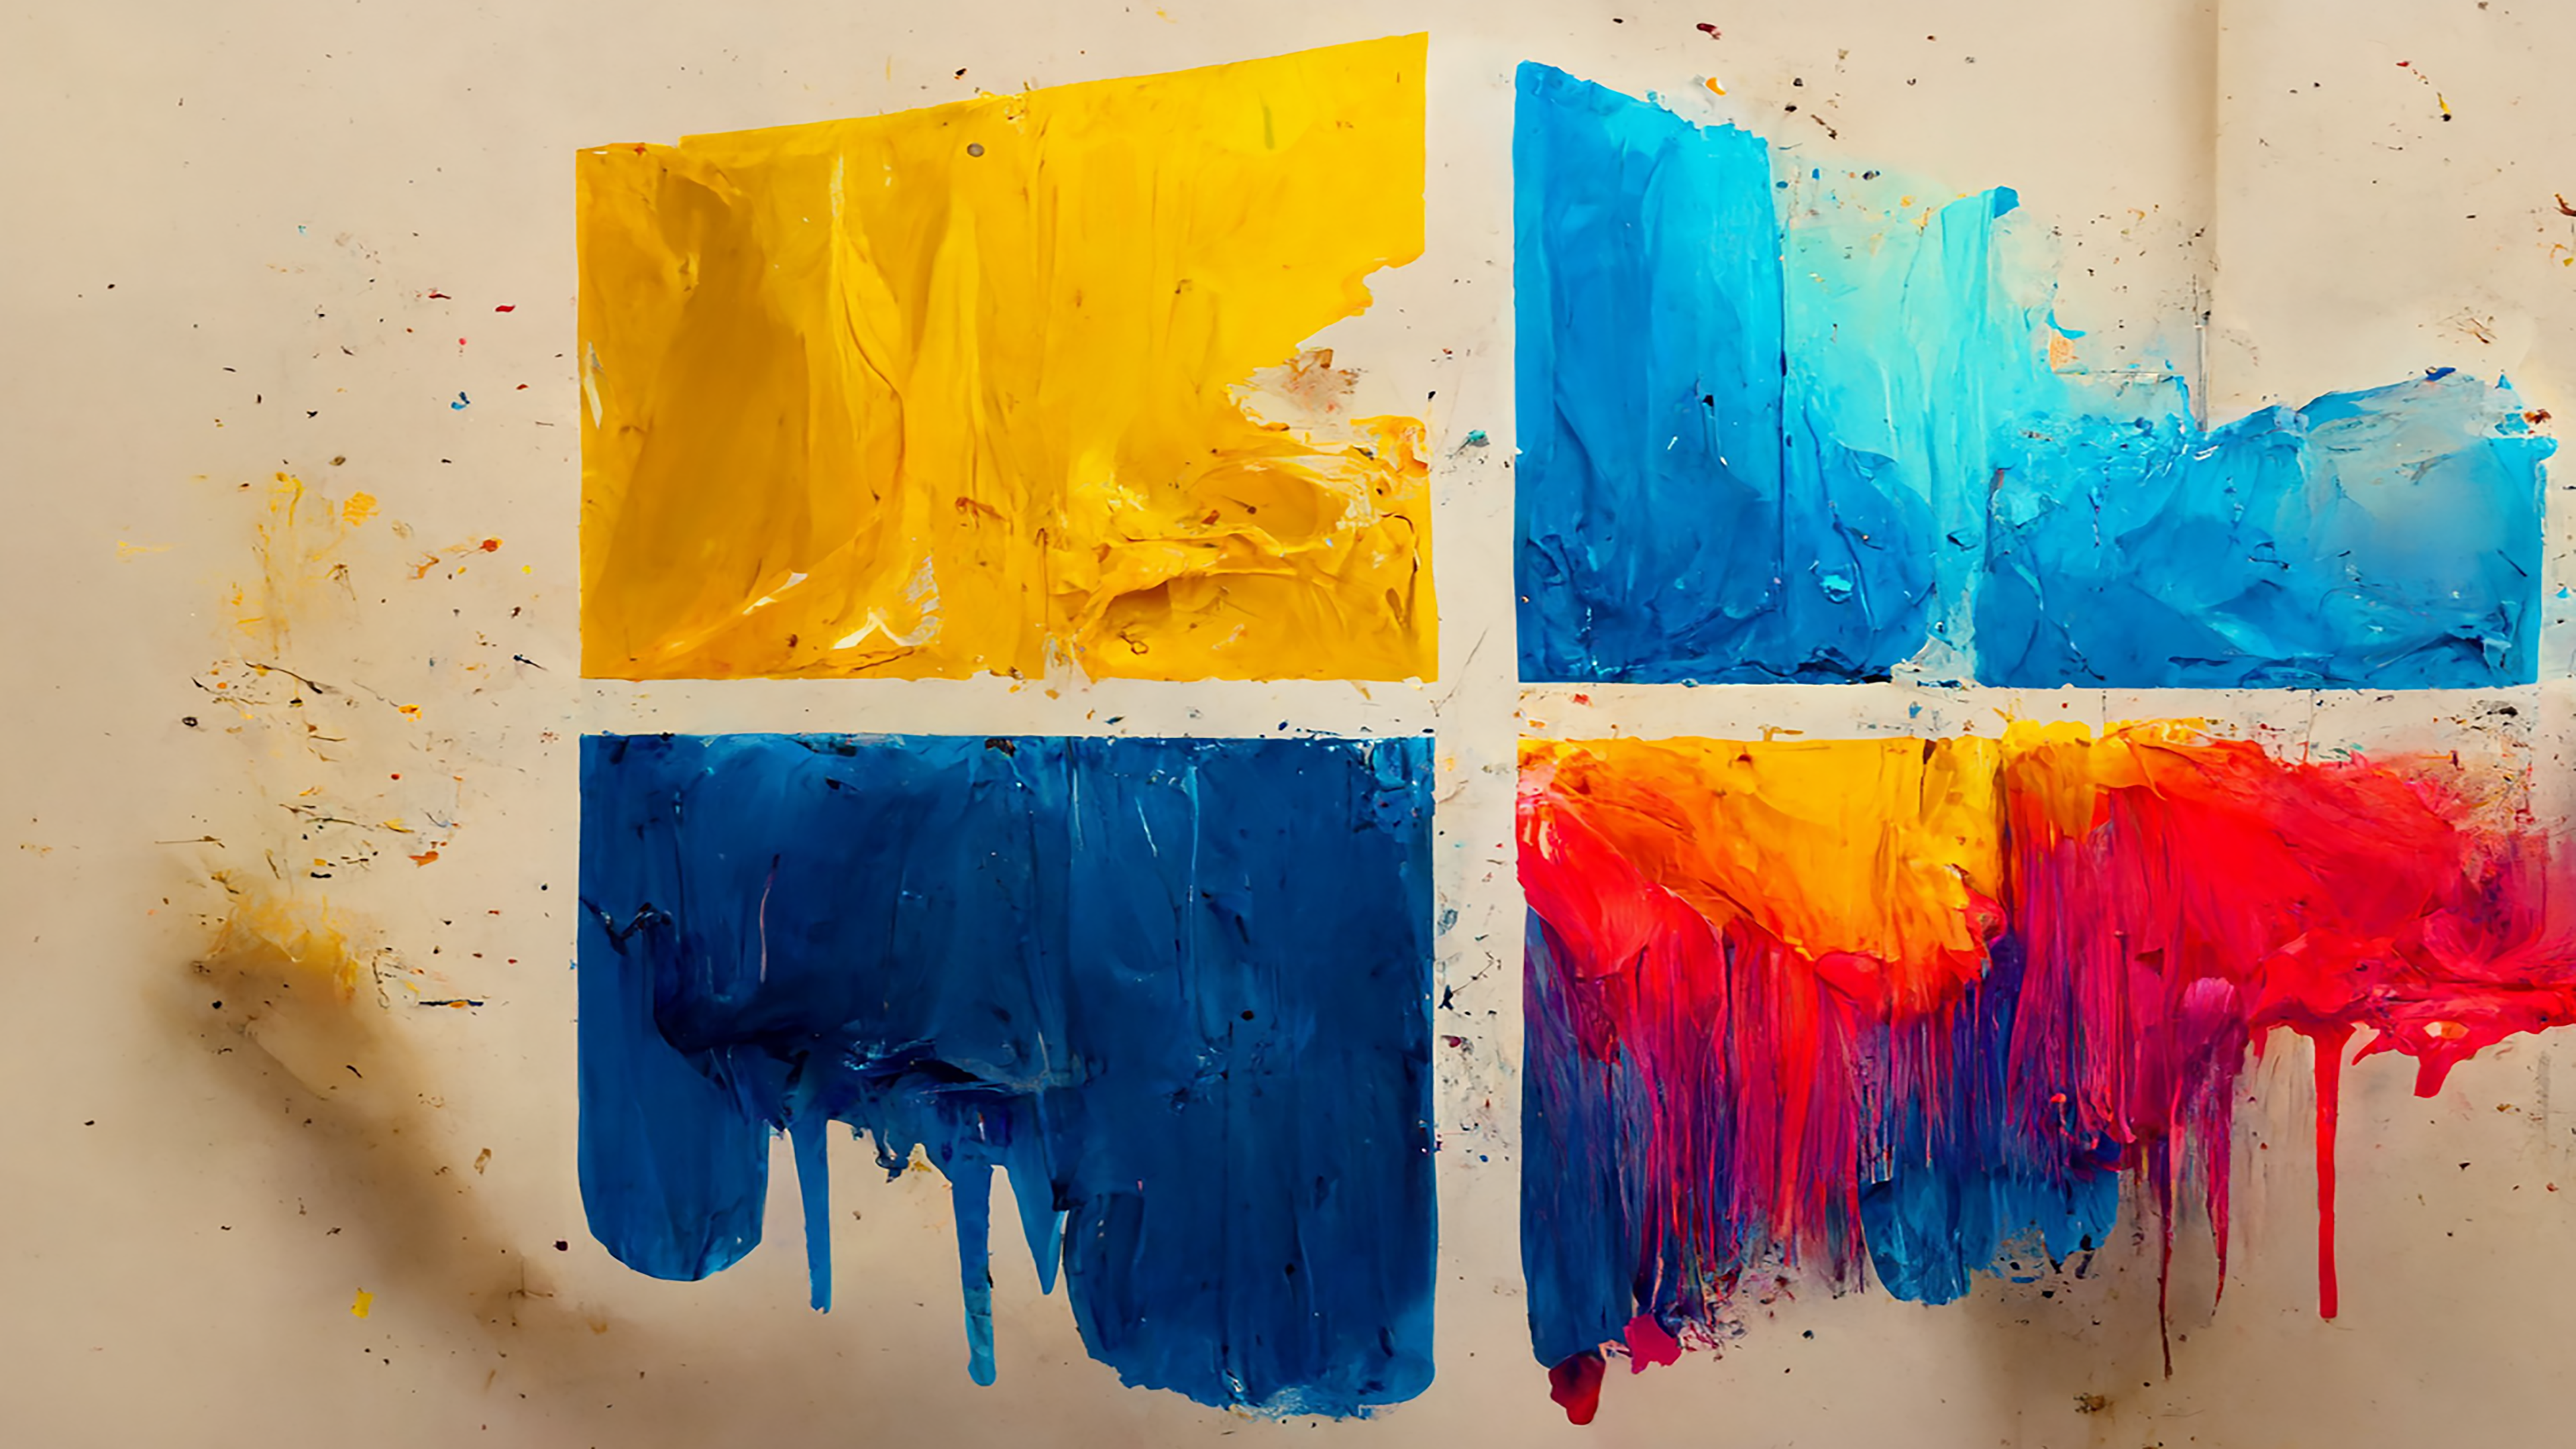 Download Windows 12 Wallpapers in 4k Resolution AIGenerated